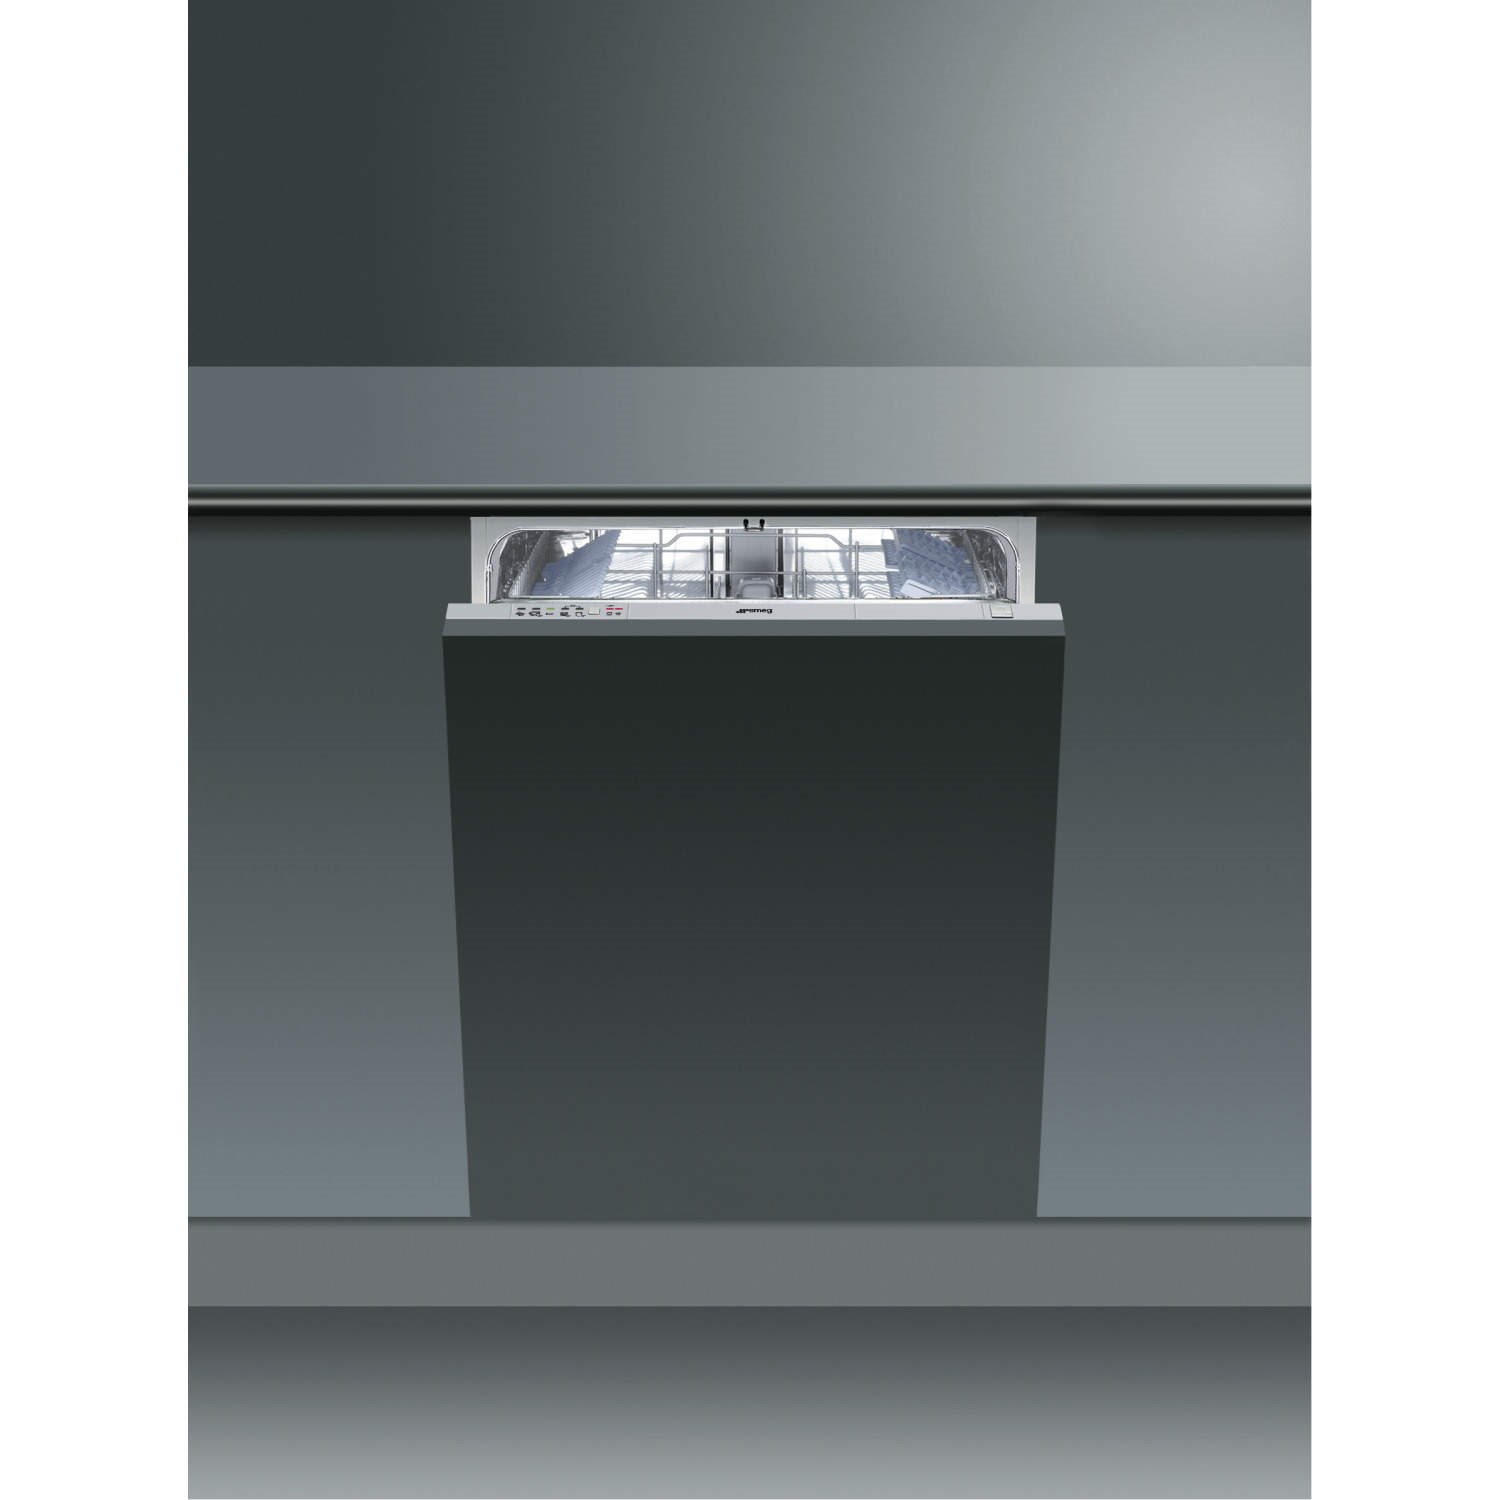 Smeg DI6012-1 12 Place Fully Integrated 